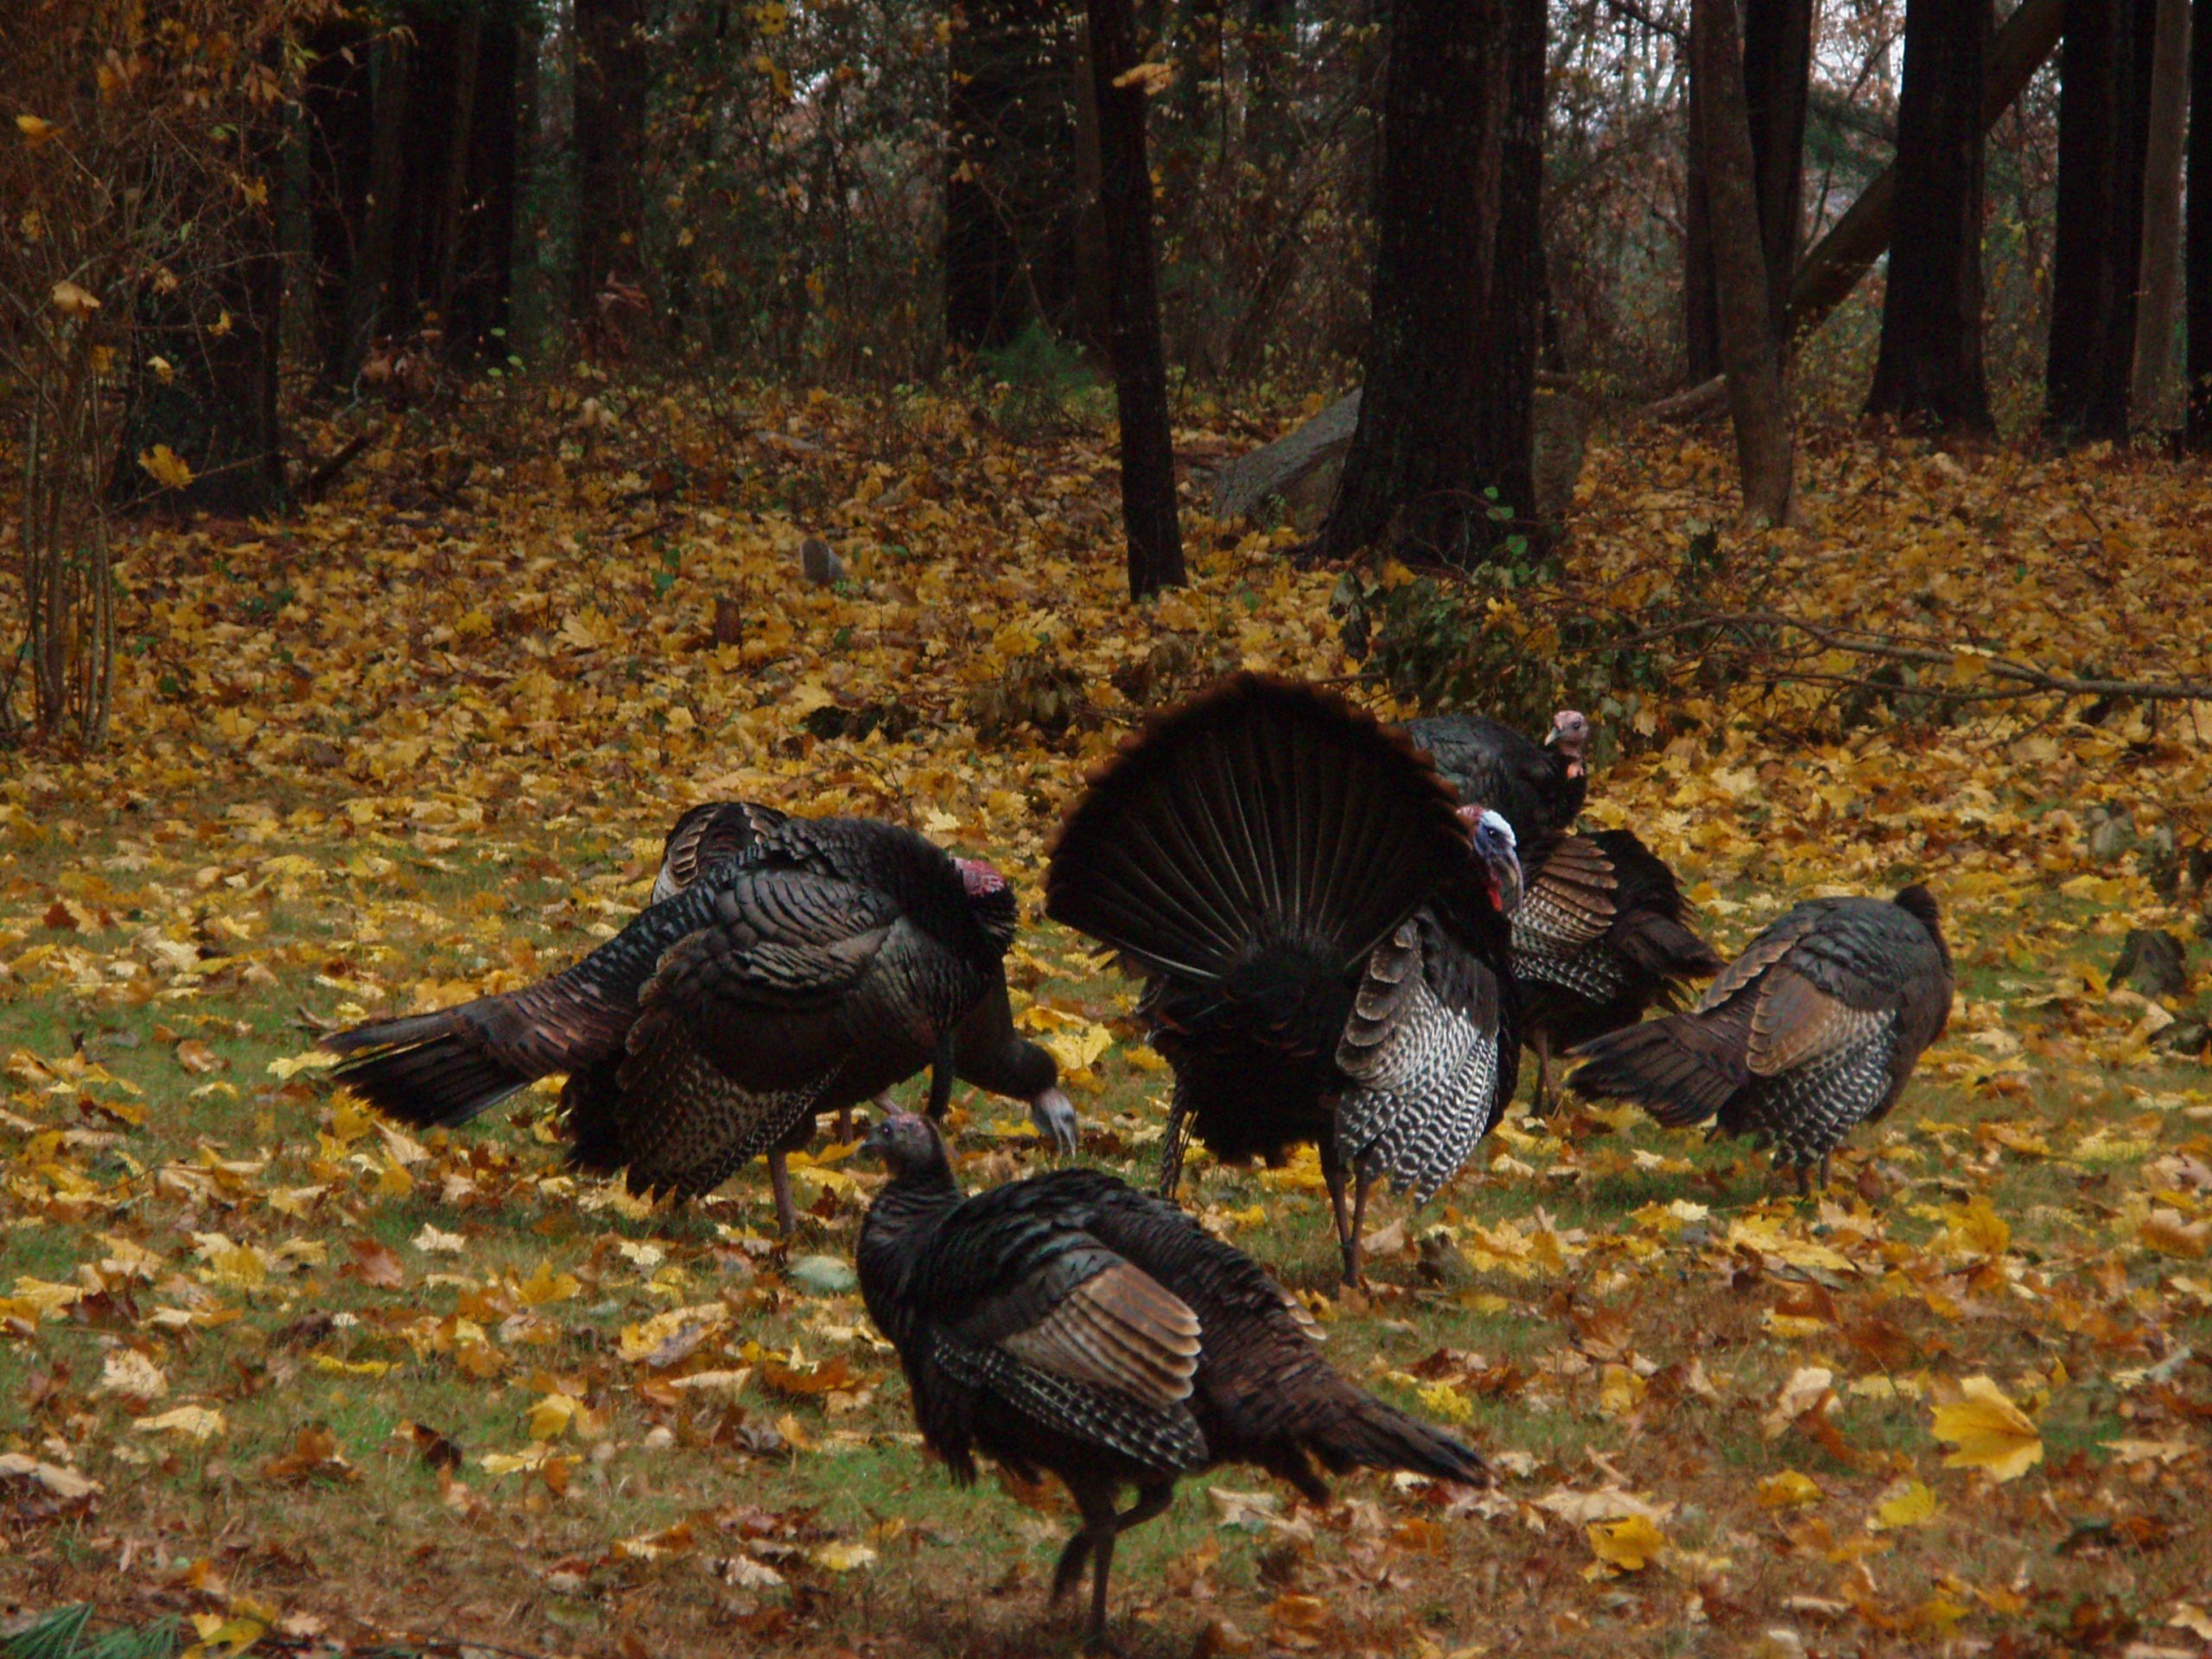 Turkeys (user submitted)